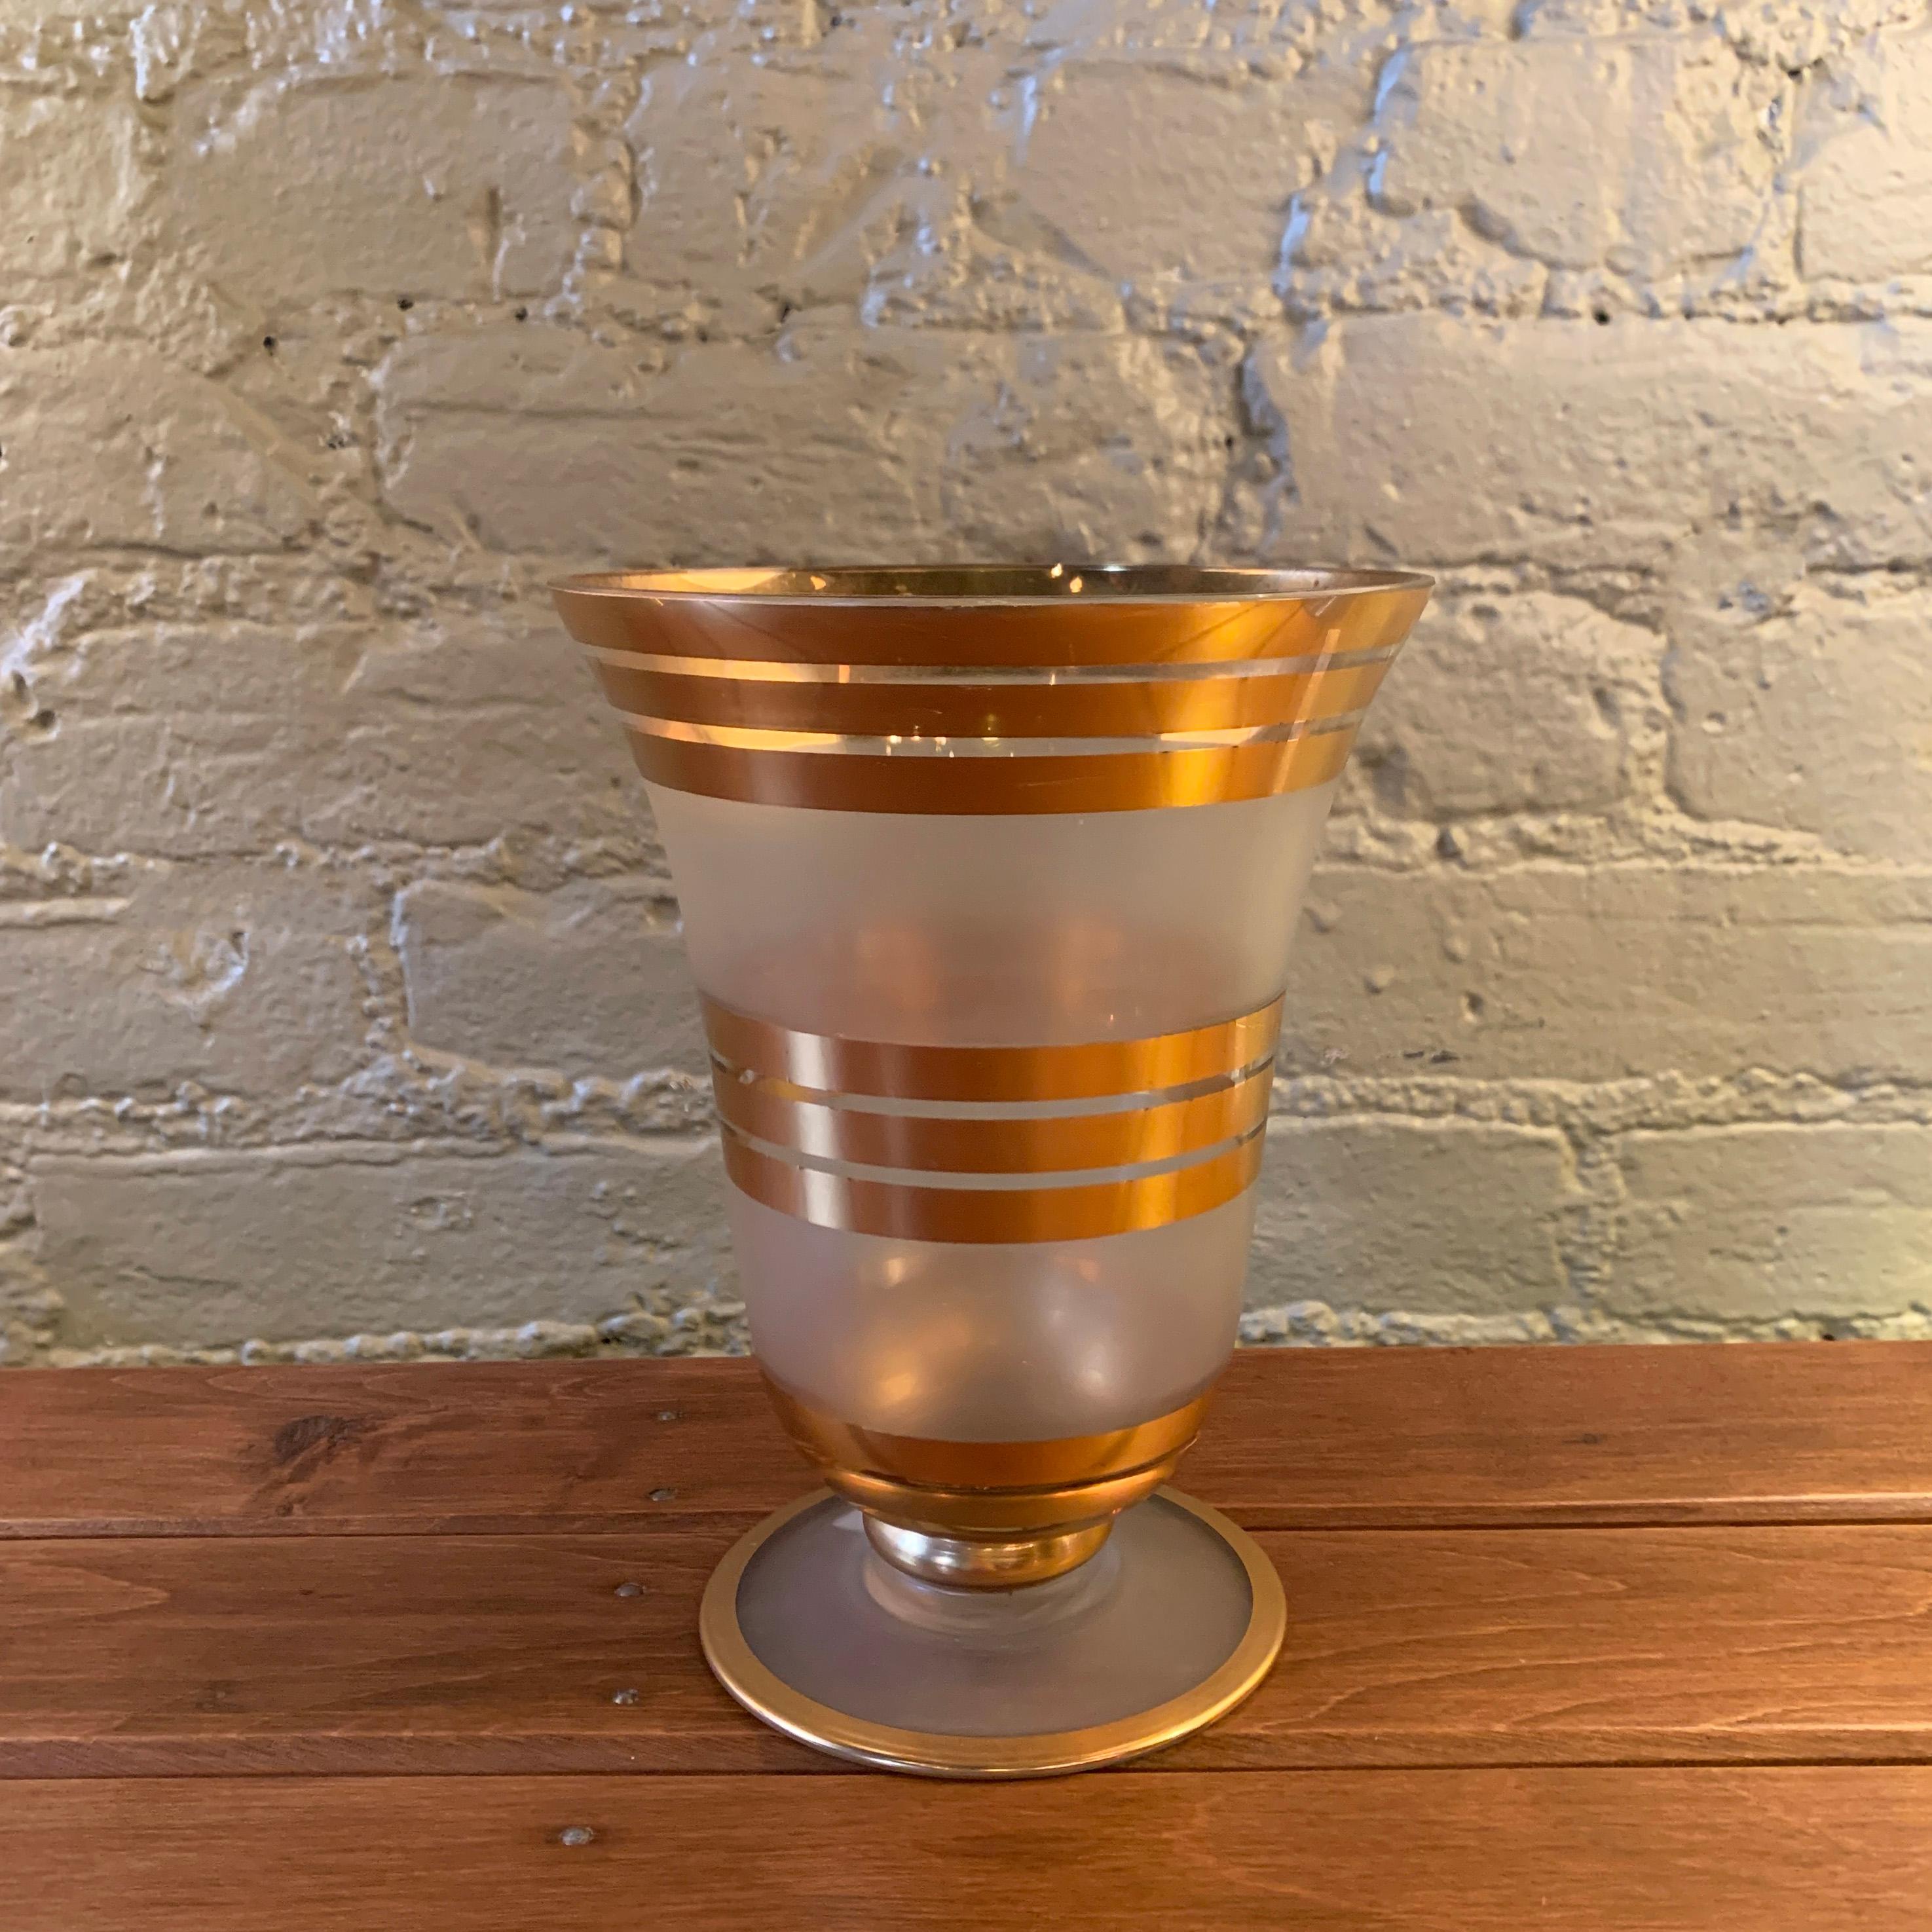 Decorative, midcentury, frosted glass vase features gilt banded detail.